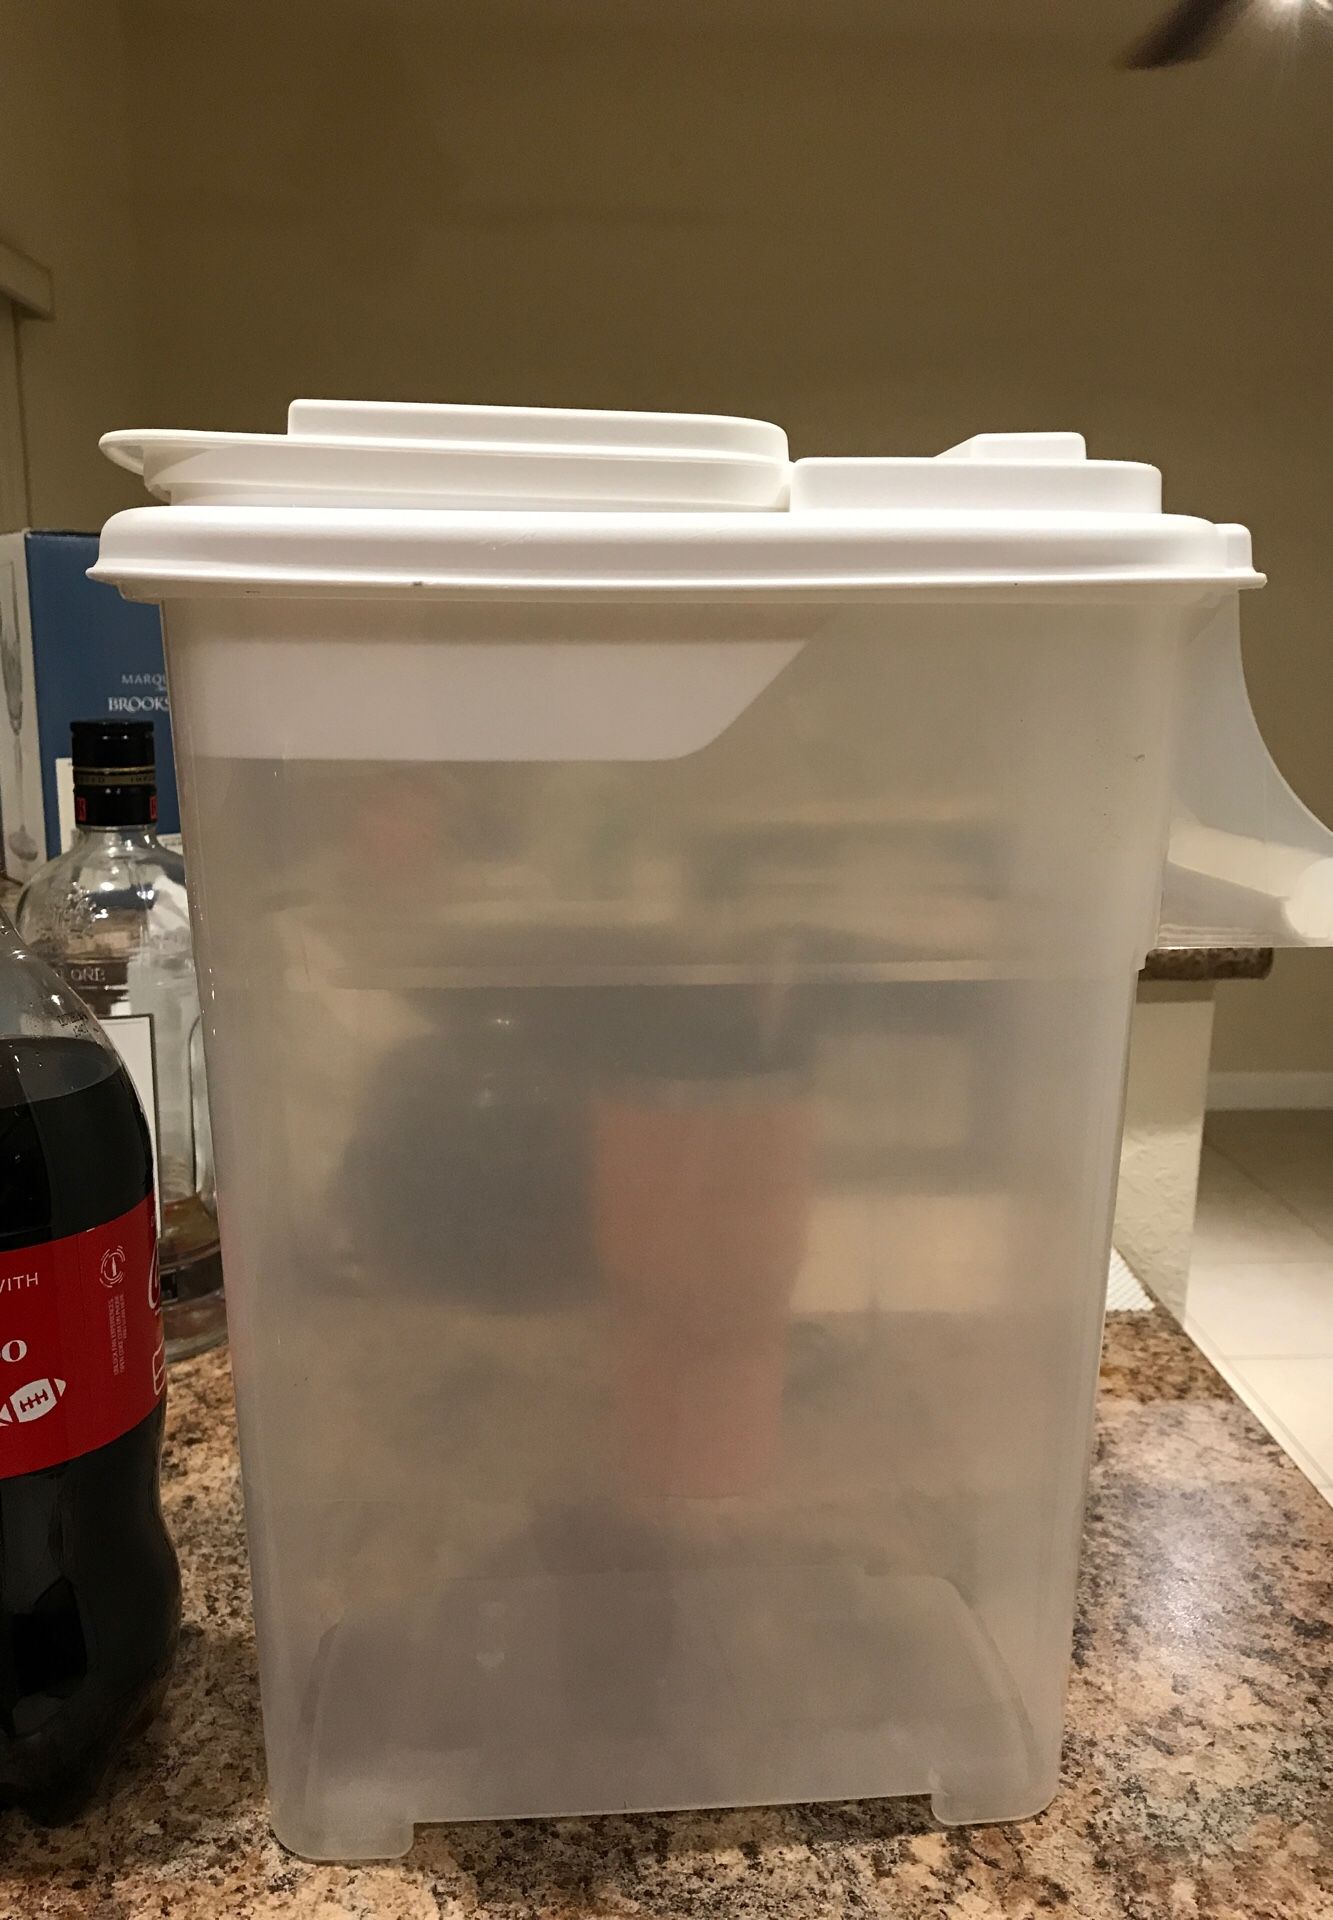 Food storage container